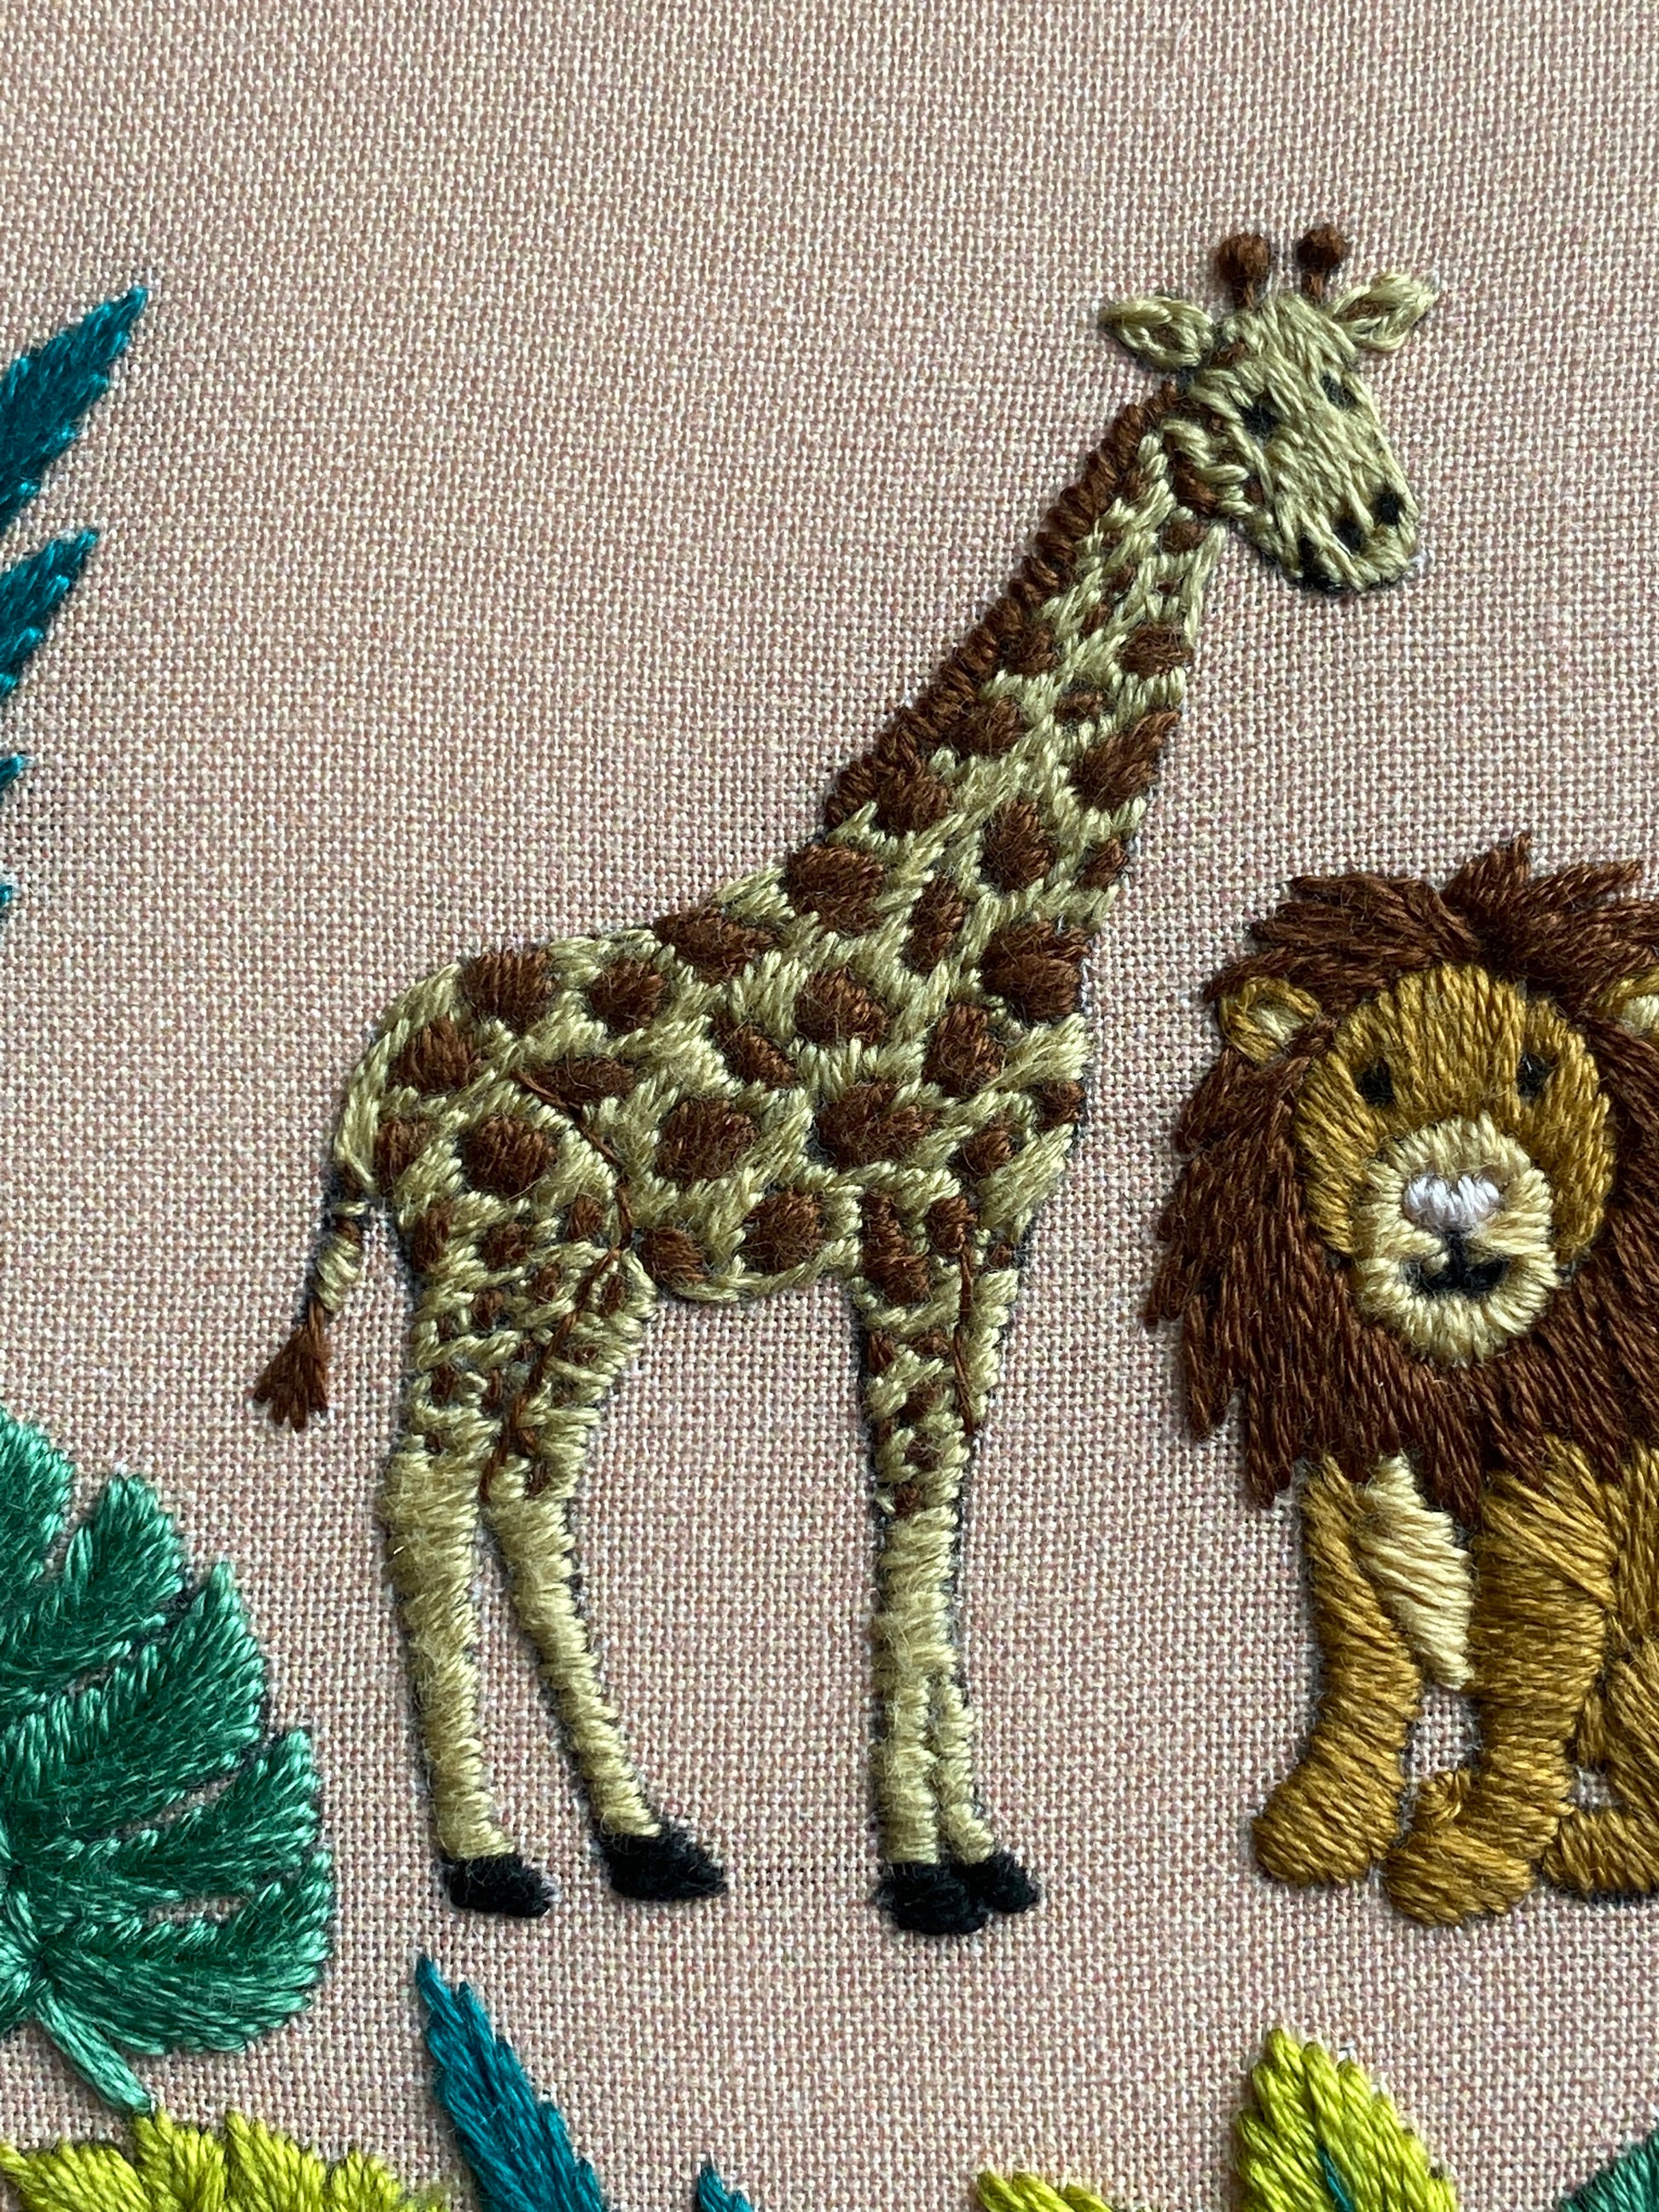 Giraffe Embroidery Kit for Beginners - Hand Embroidery at Weekend Kits